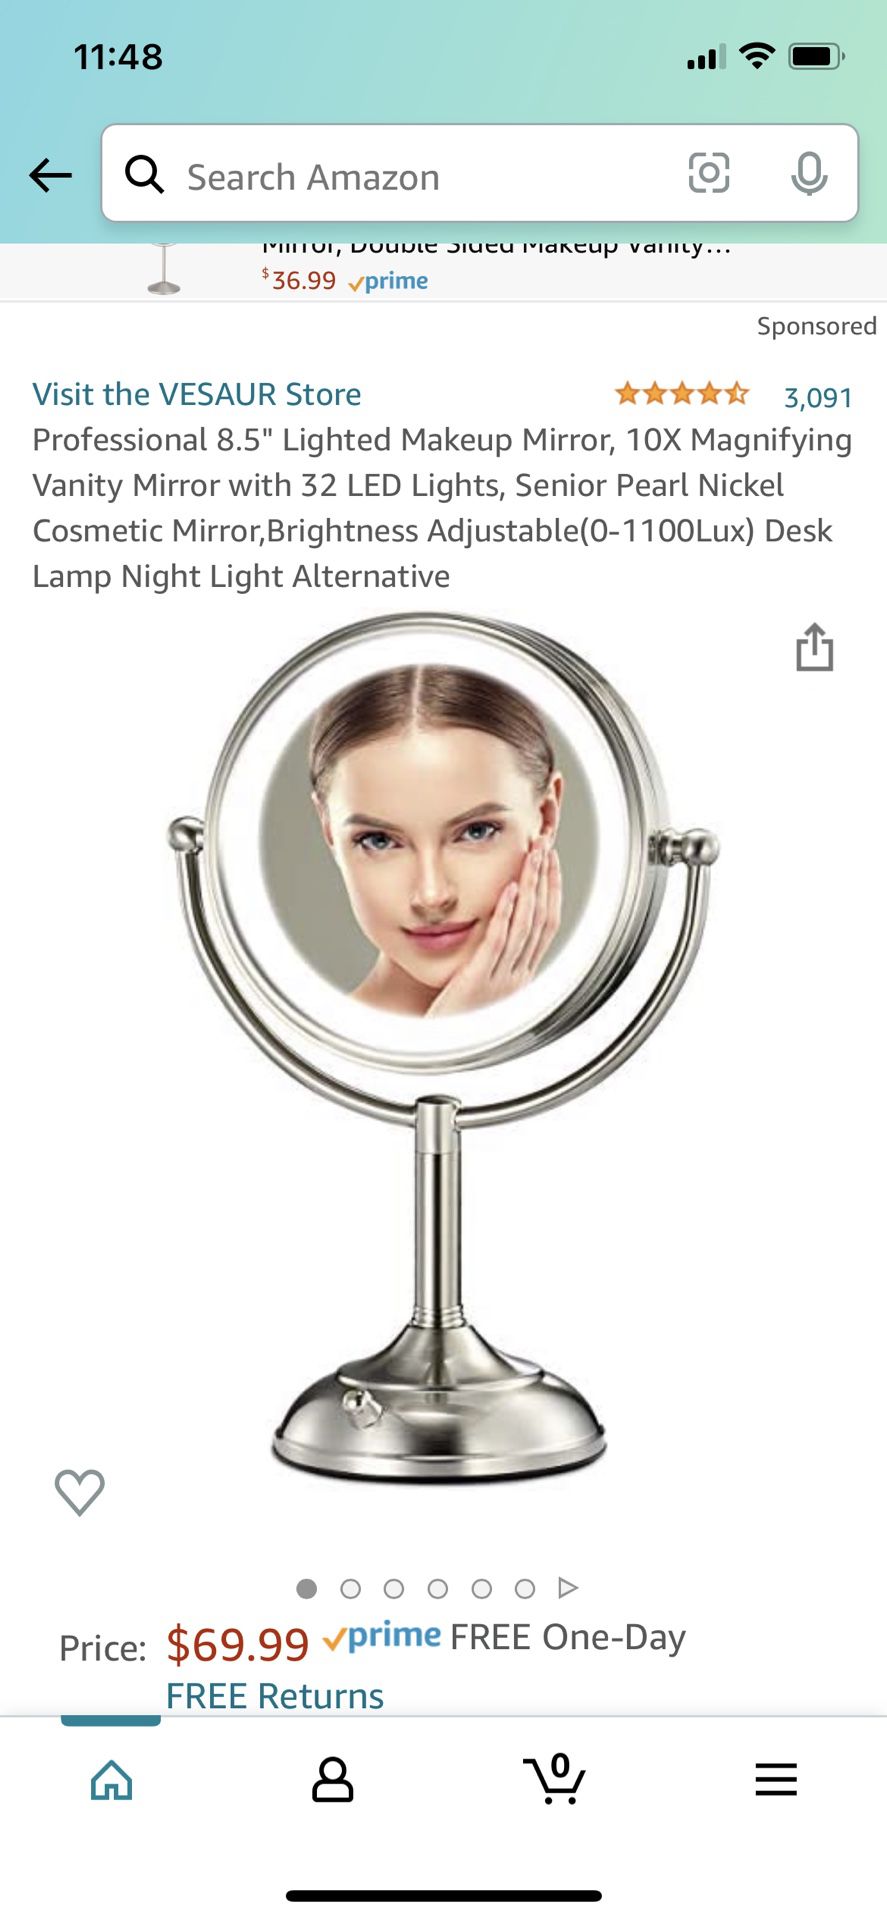 Professional 8.5” Lighted Makeup Mirror